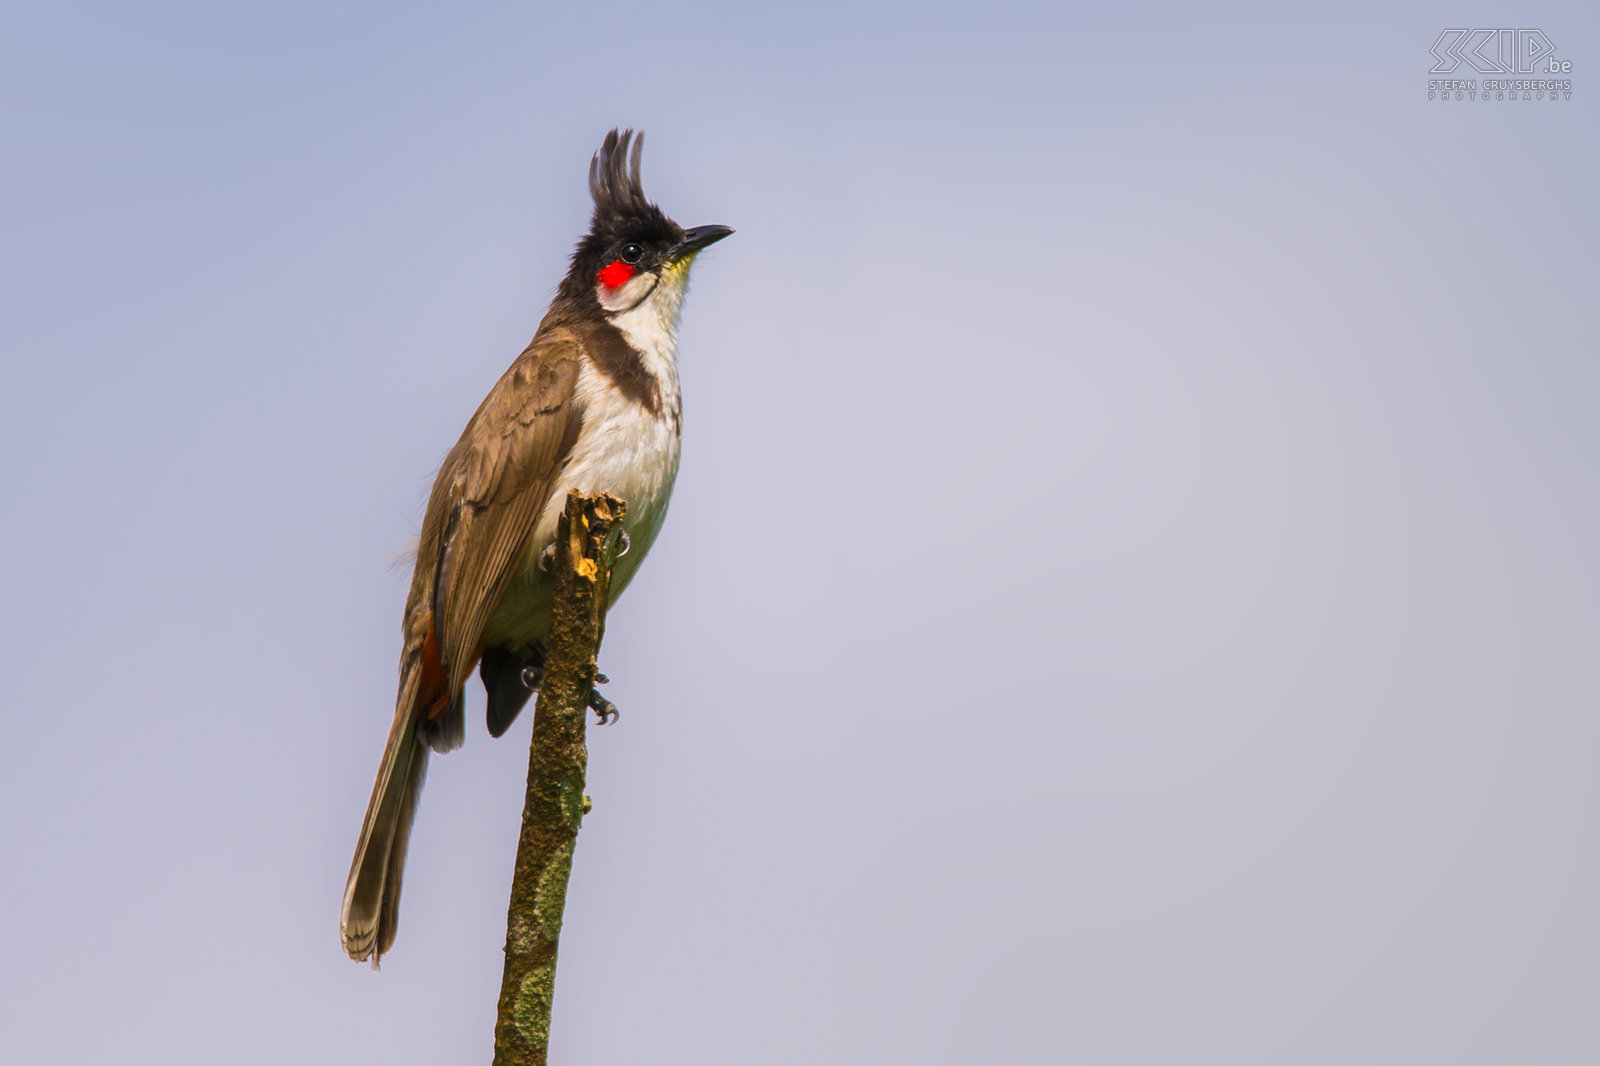 Munnar - Red-whiskered bulbul The Red-whiskered bulbul (Pycnonotus jocosus) is a very common bird in southern India. Stefan Cruysberghs